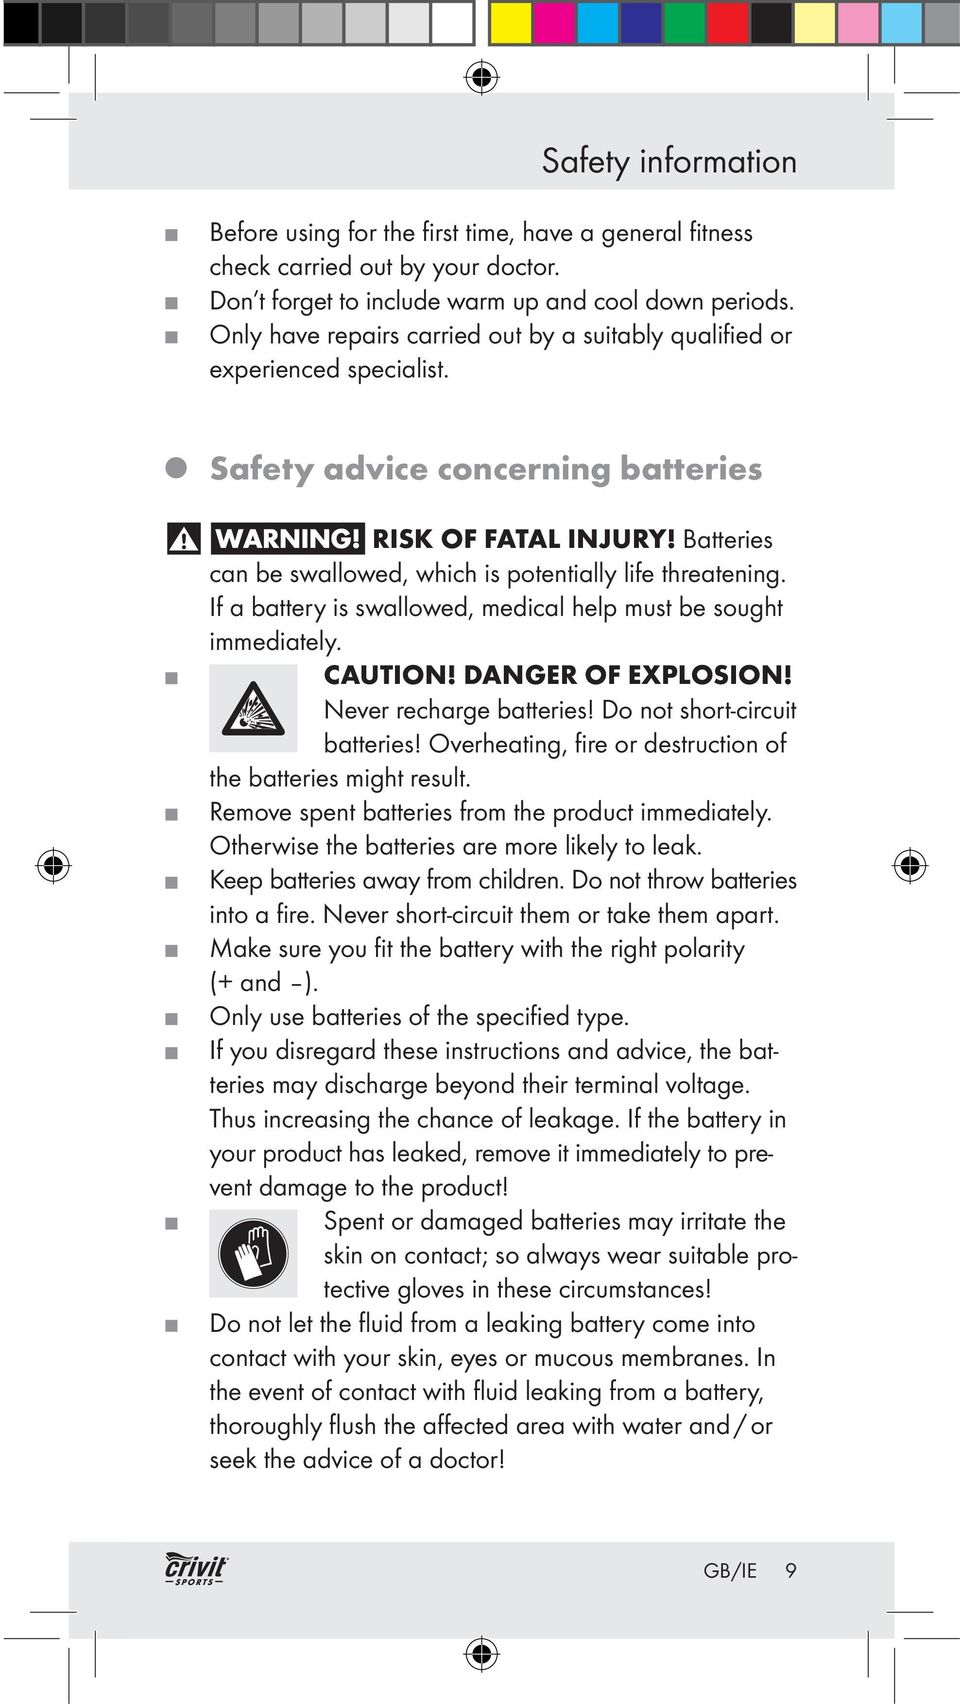 Batteries can be swallowed, which is potentially life threatening. If a battery is swallowed, medical help must be sought immediately. CAUTION! DANGER OF EXPLOSION! Never recharge batteries!